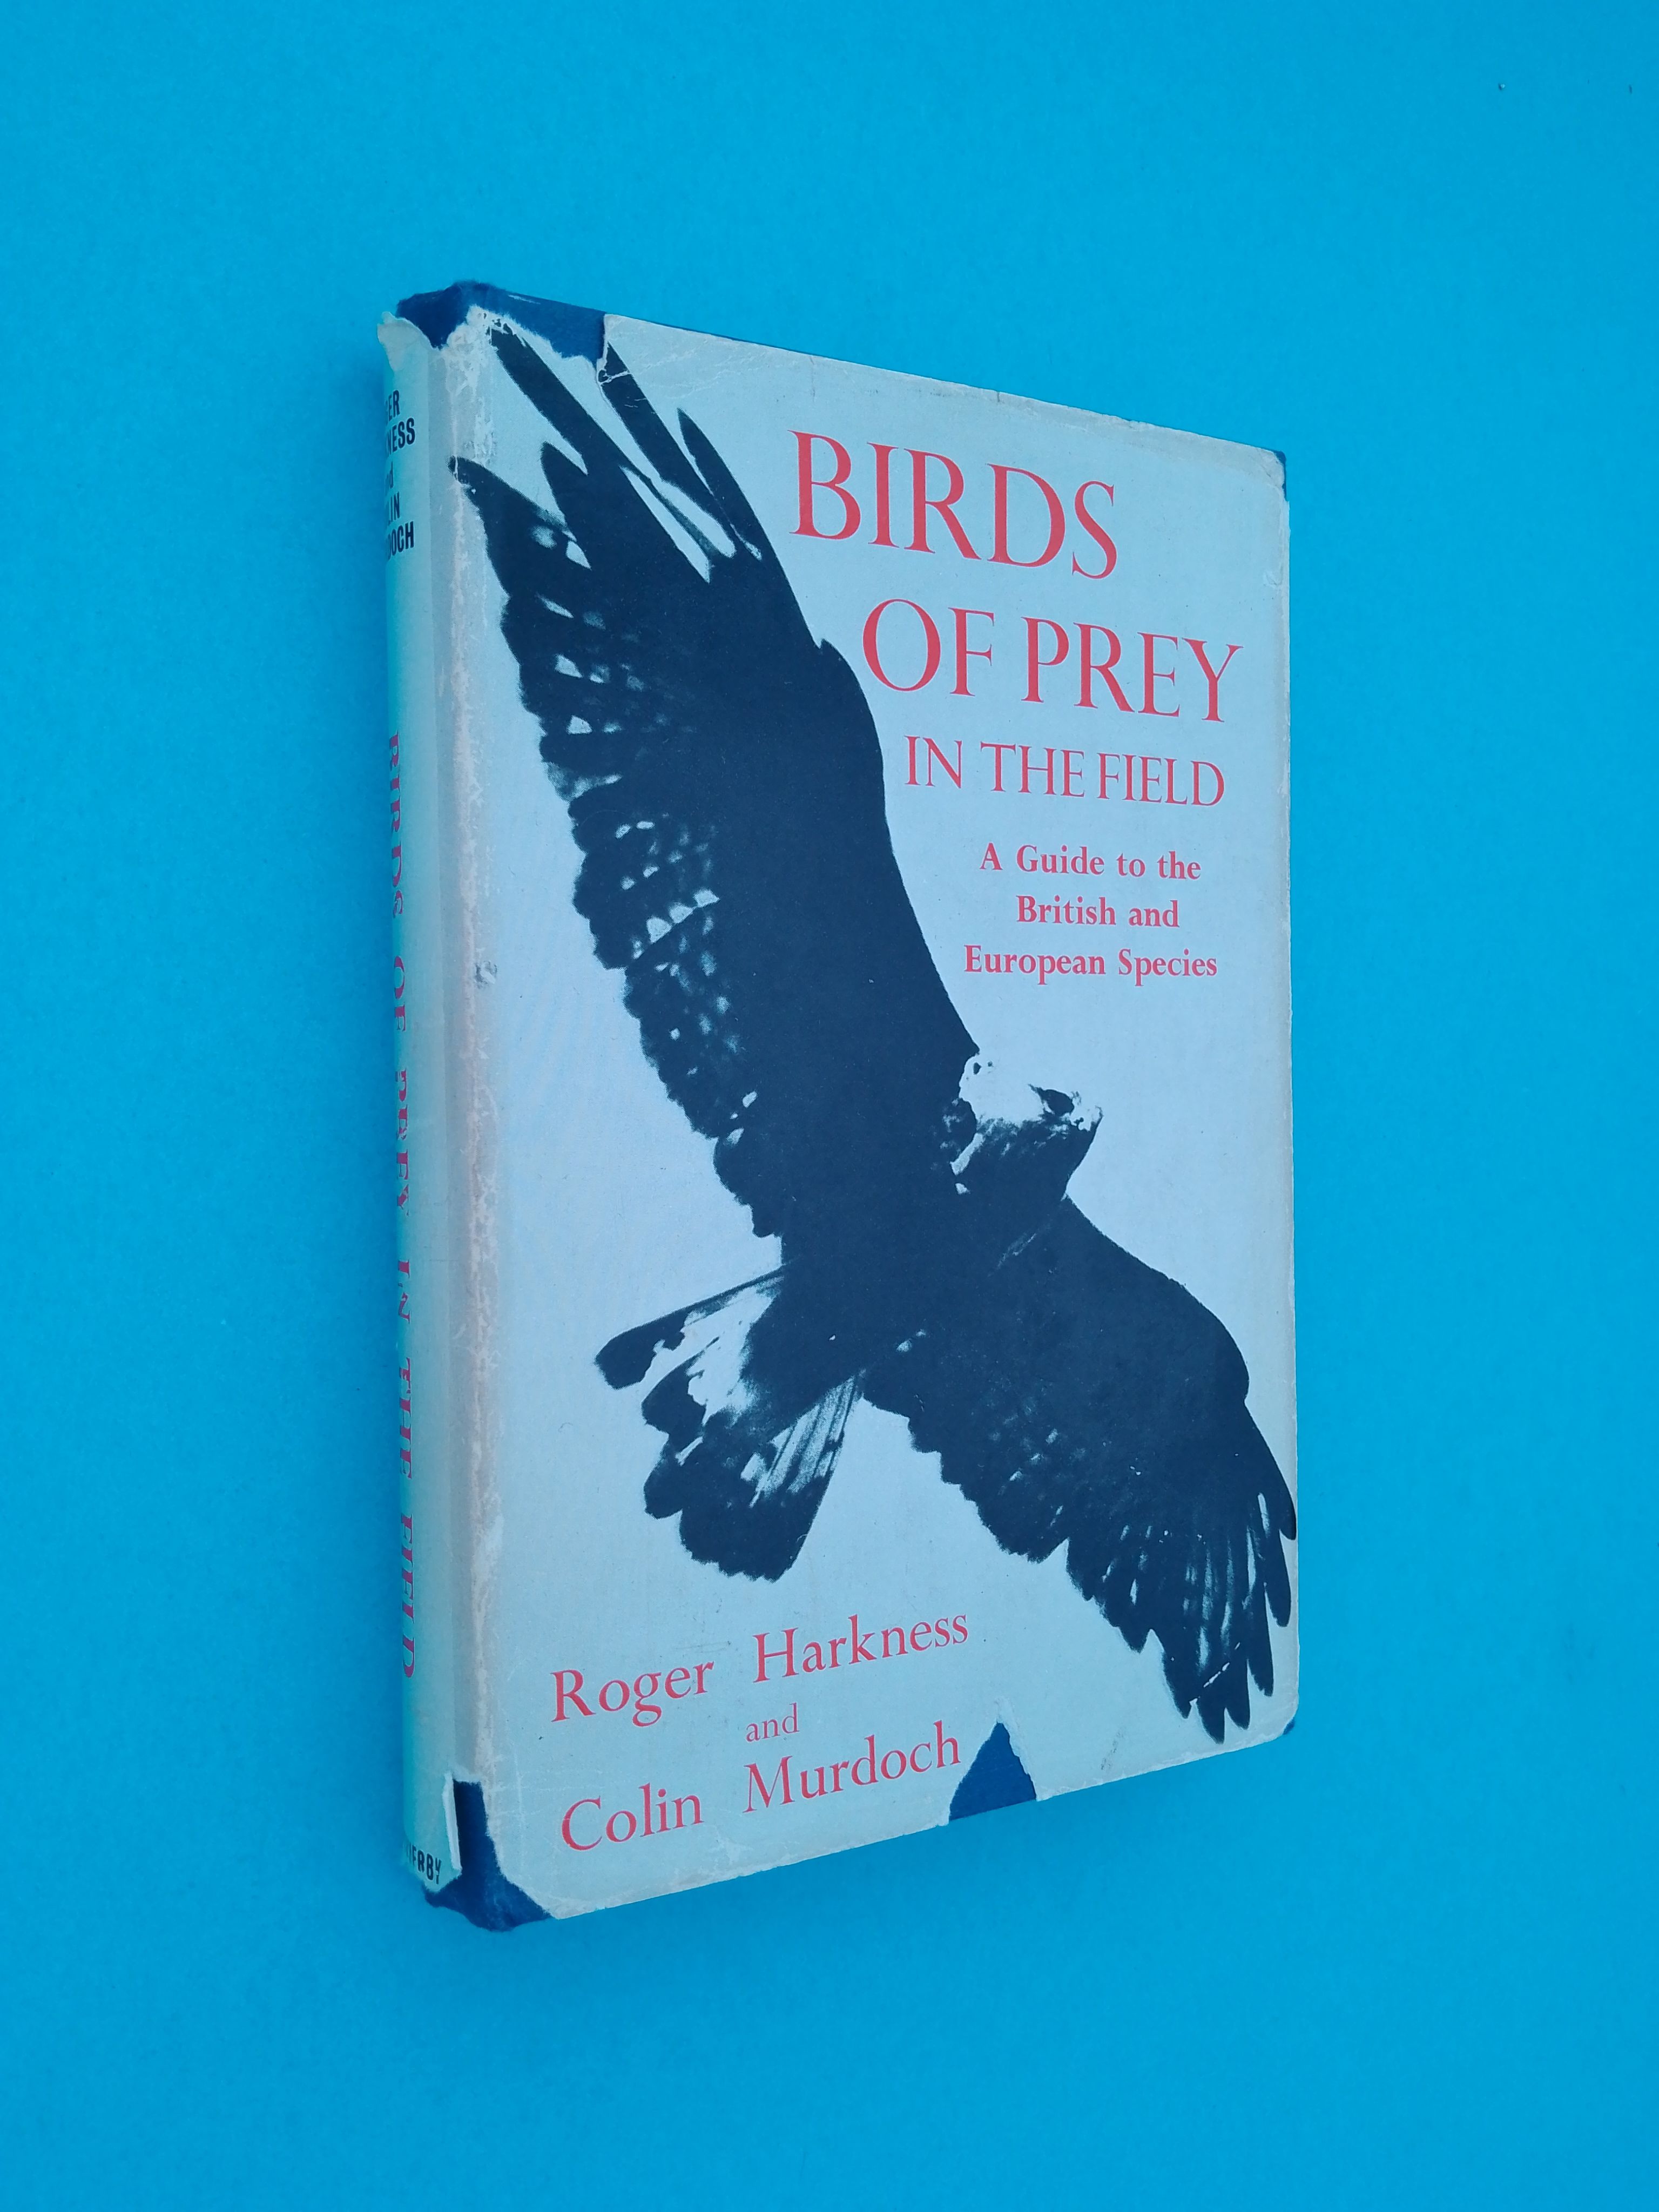 A Guide to British Birds of Prey